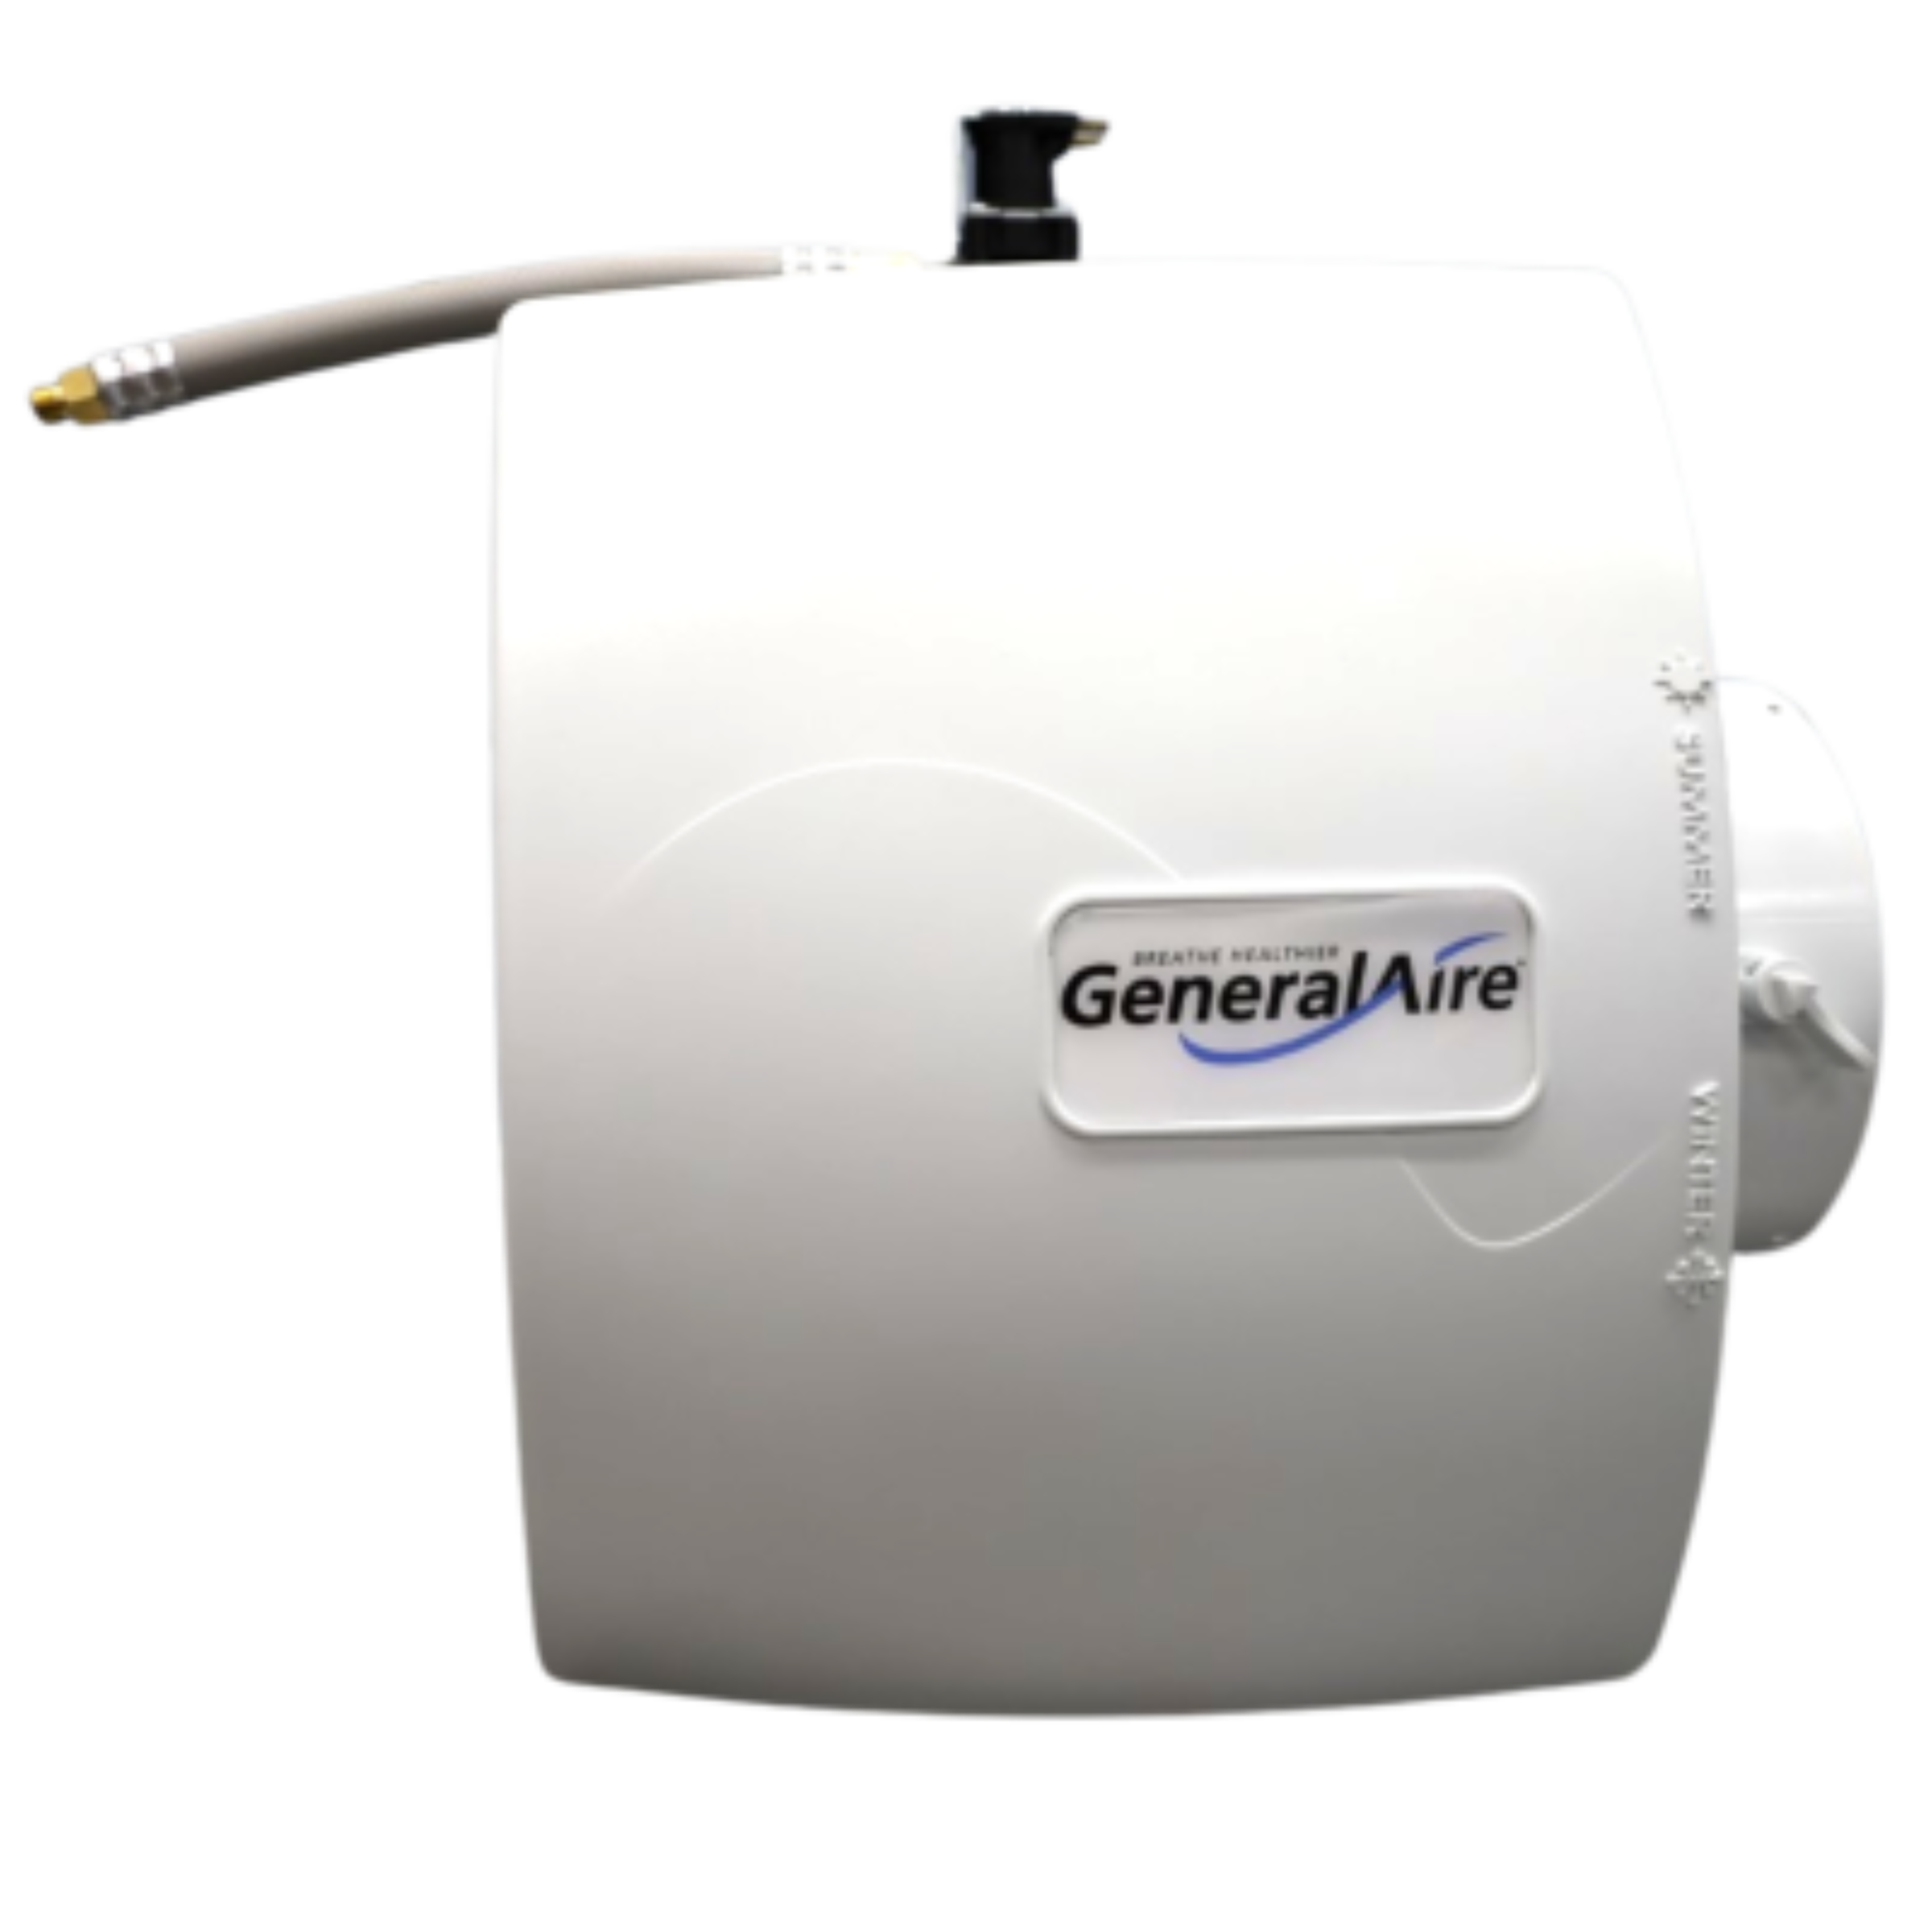 GeneralAire Model GF-4200PFT Evaporative Humidifier, 13 Gallon/Day Water Capacity, Full Coverage up to 4,200 sq. ft.